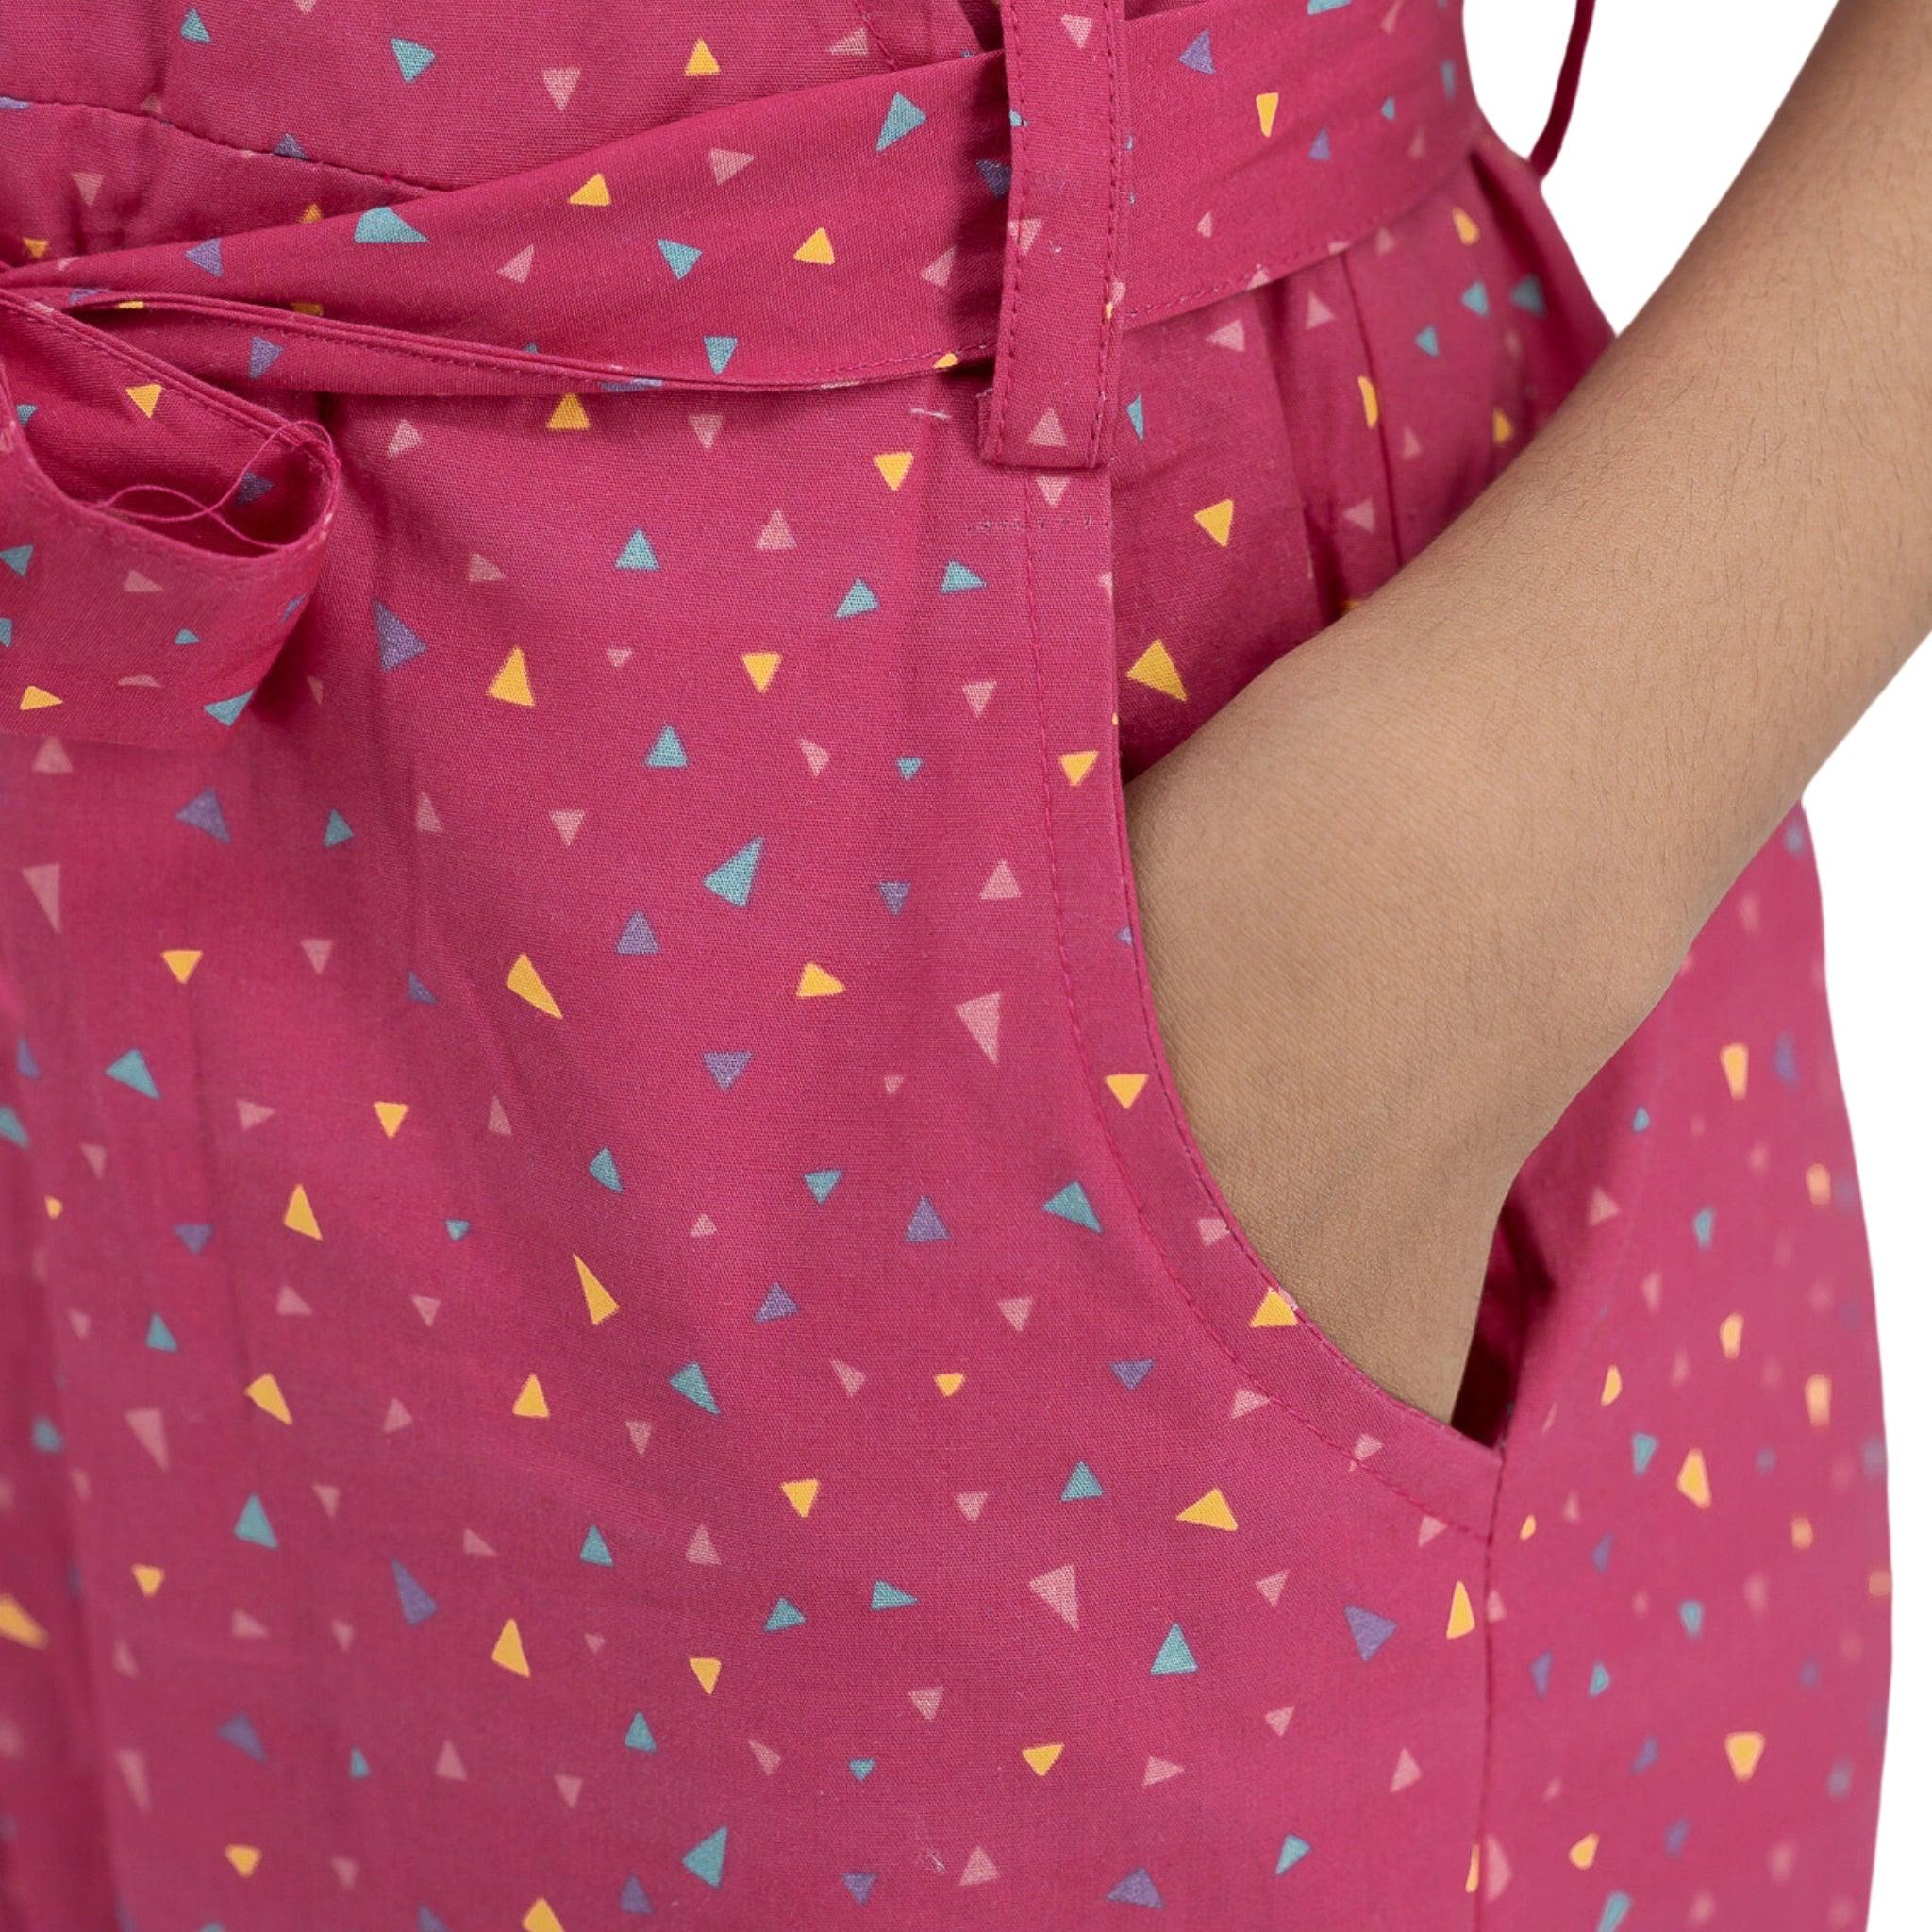 Close-up of a person wearing a Red Rose Cotton Jumpsuit for Girls by Karee, with a colorful triangle pattern, focusing on the waist tie detail.